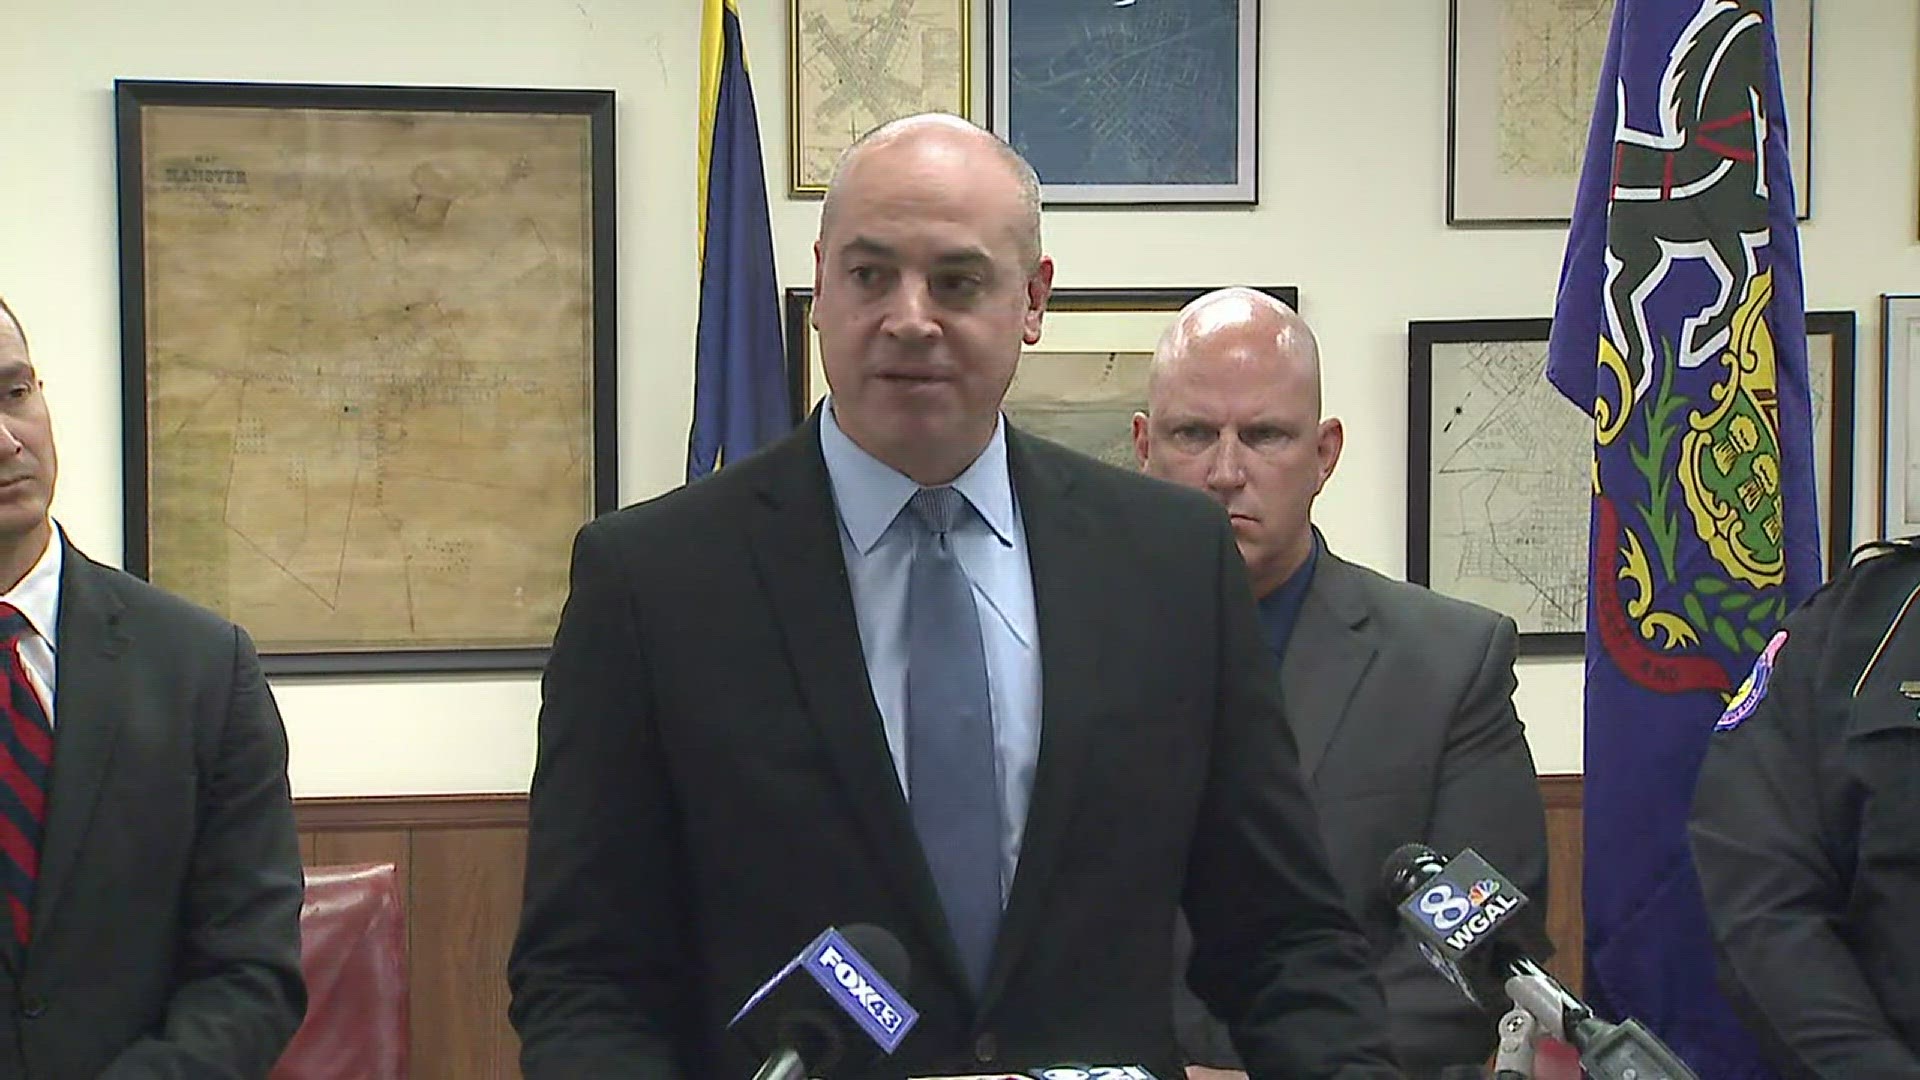 York County District Attorney Dave Sunday and Chief Chad Martin of the Hanover Borough Police Department announced the results of a two-year investigation Wednesday.